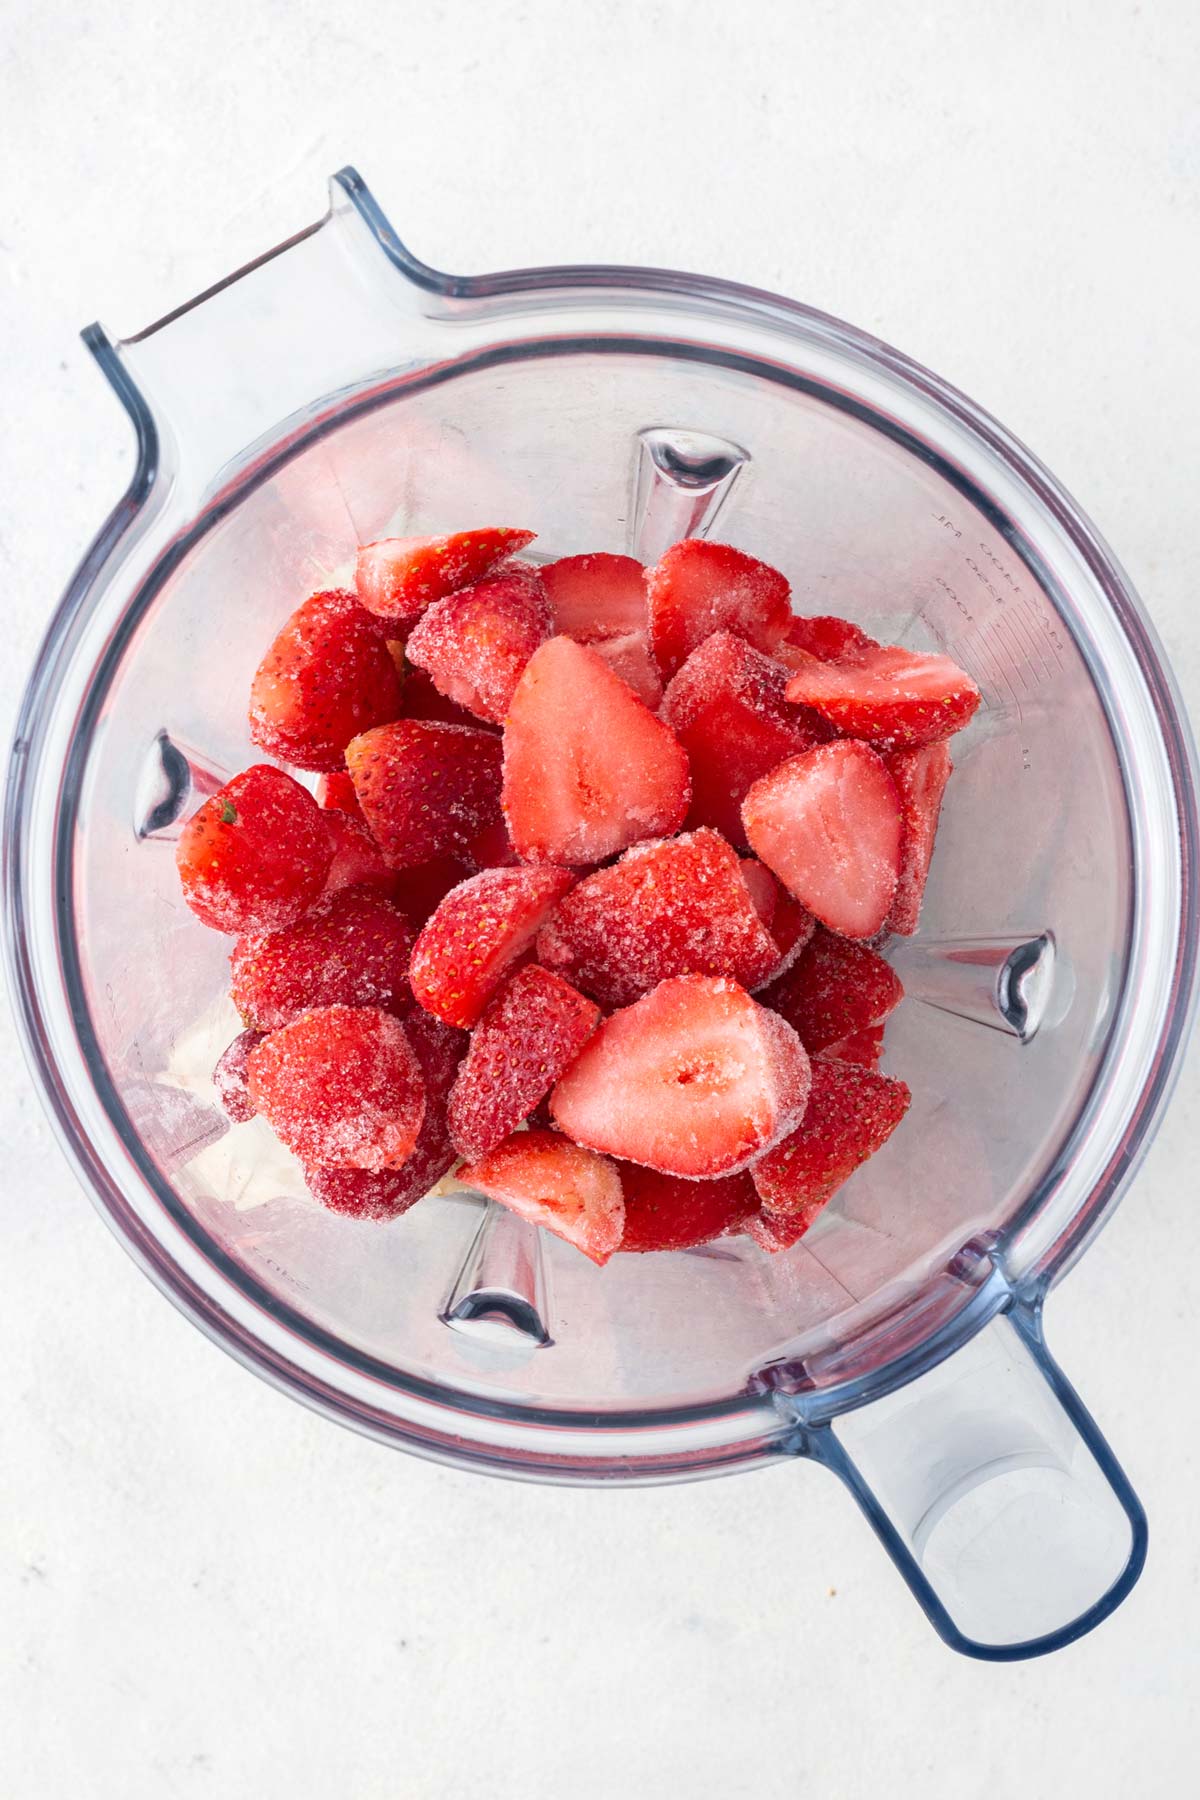 Strawberry Banana Smoothie Bowl ingredients in a blender.